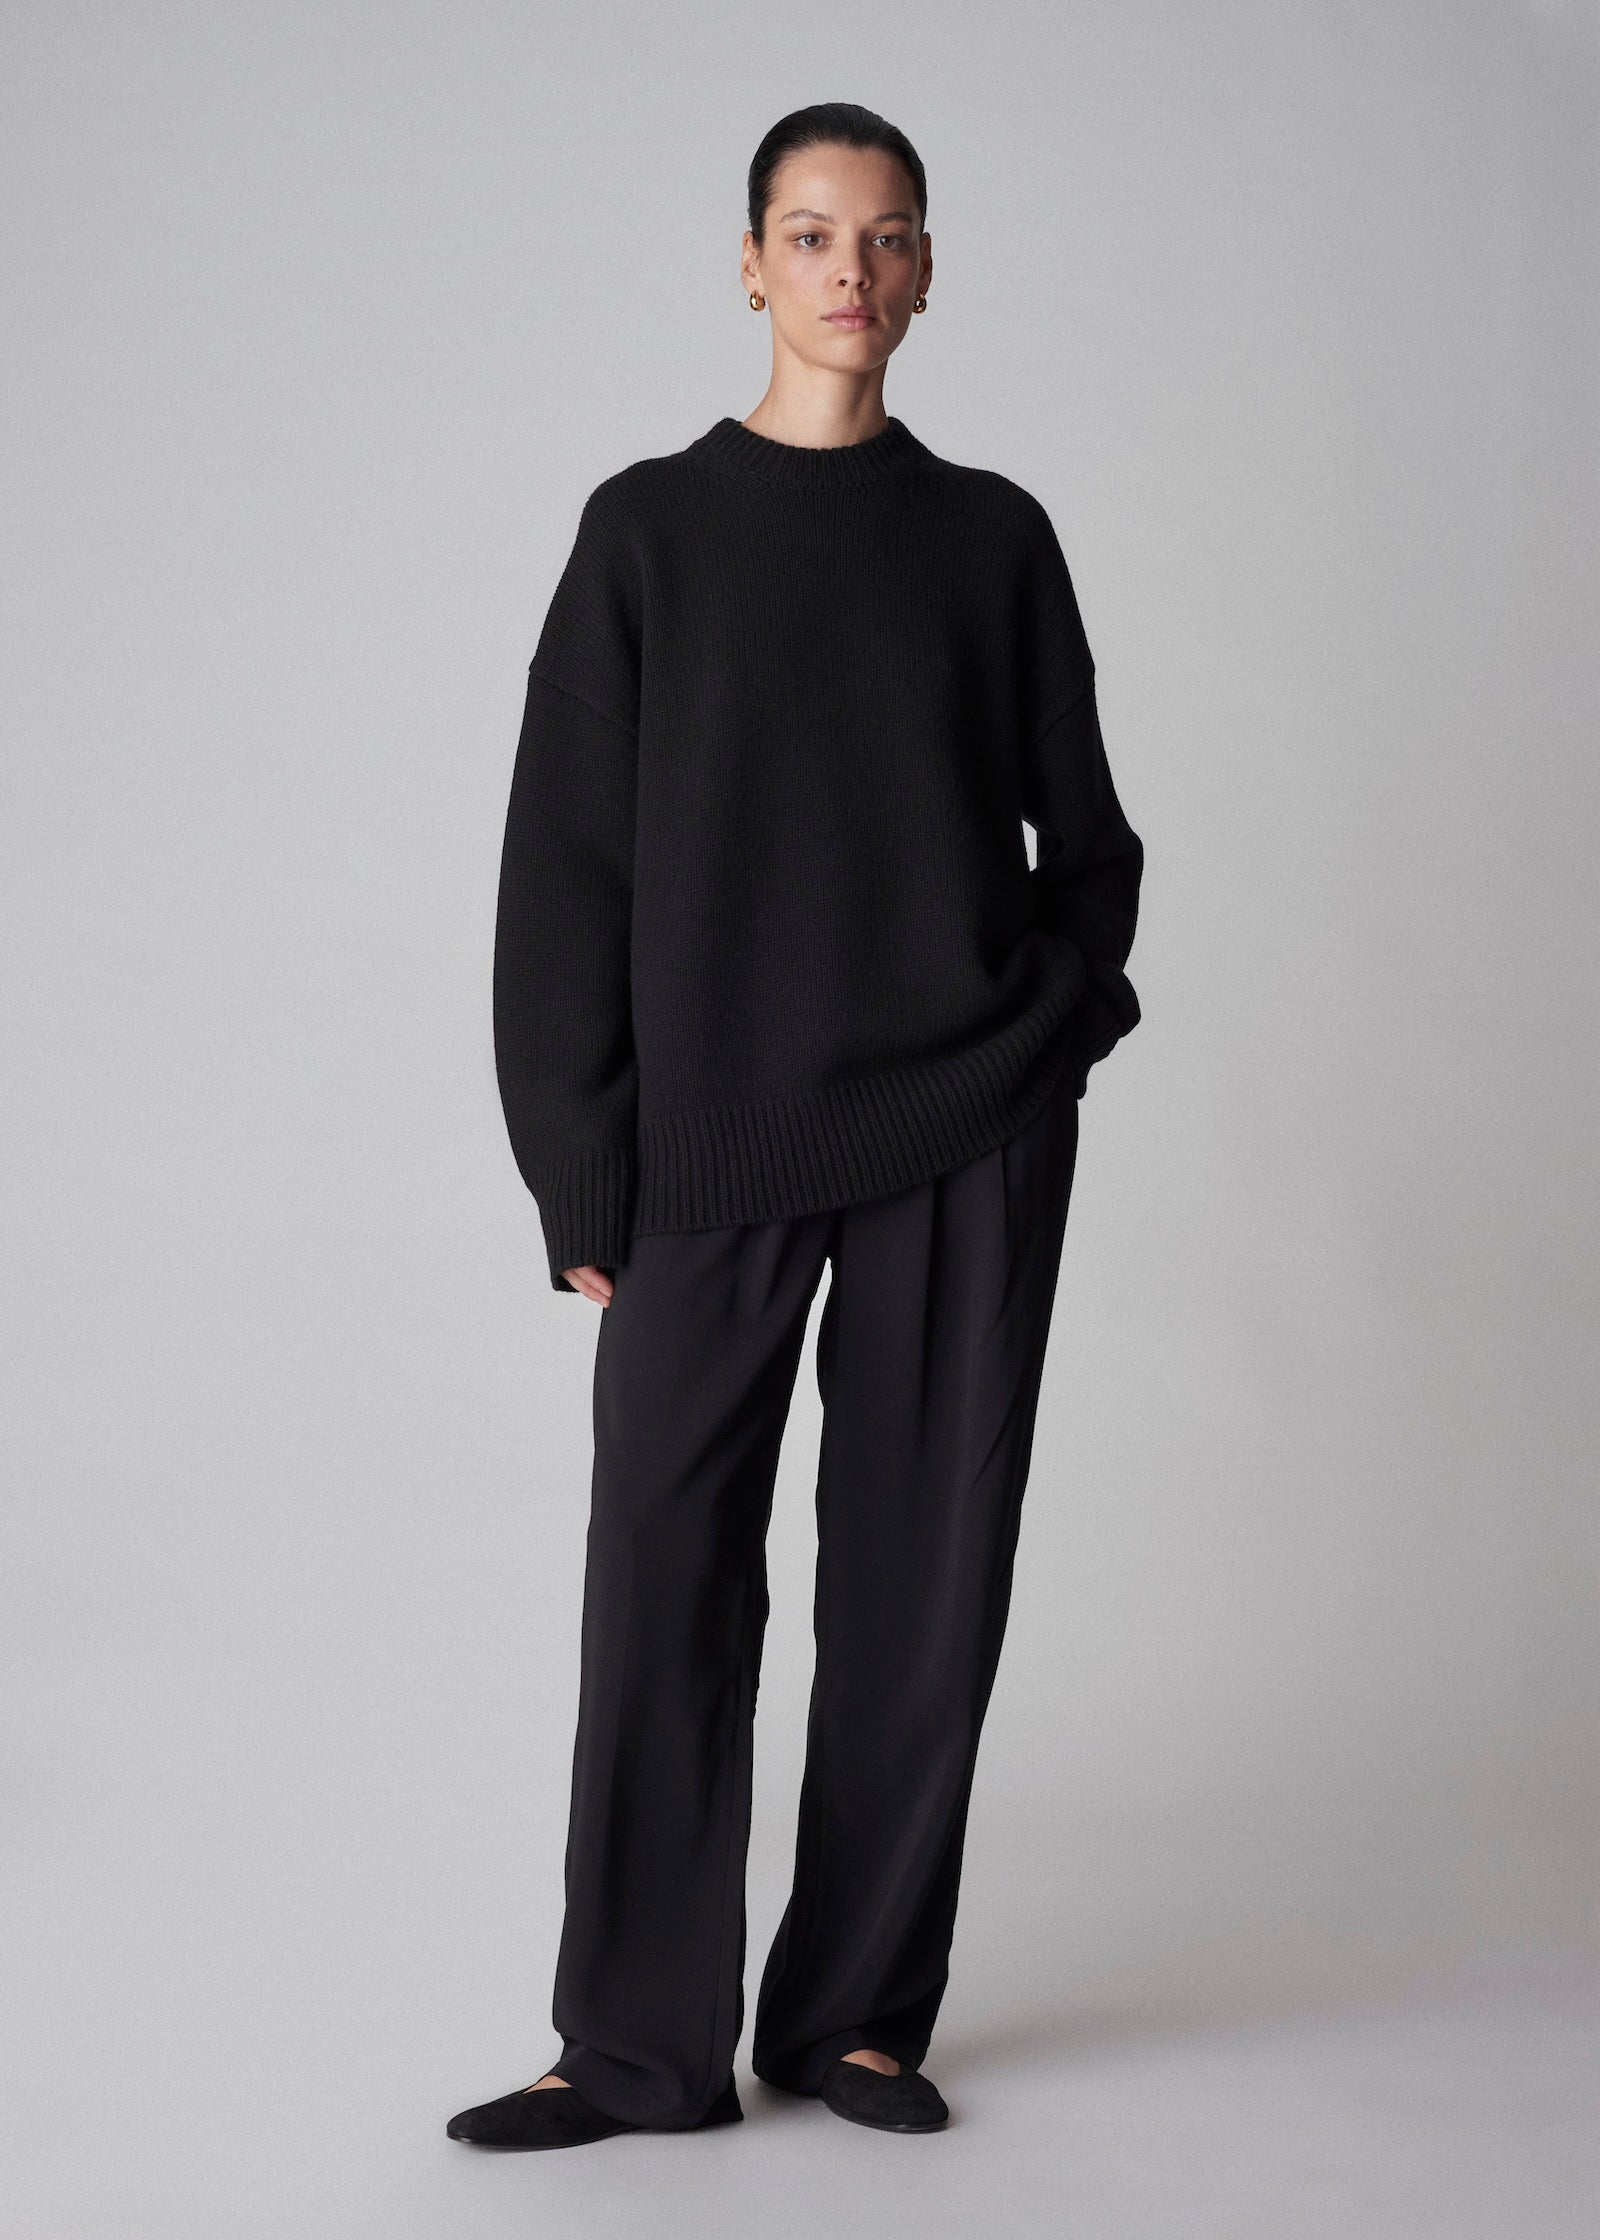 Boyfriend Crew Neck in Wool Cashmere - Black - CO Collections